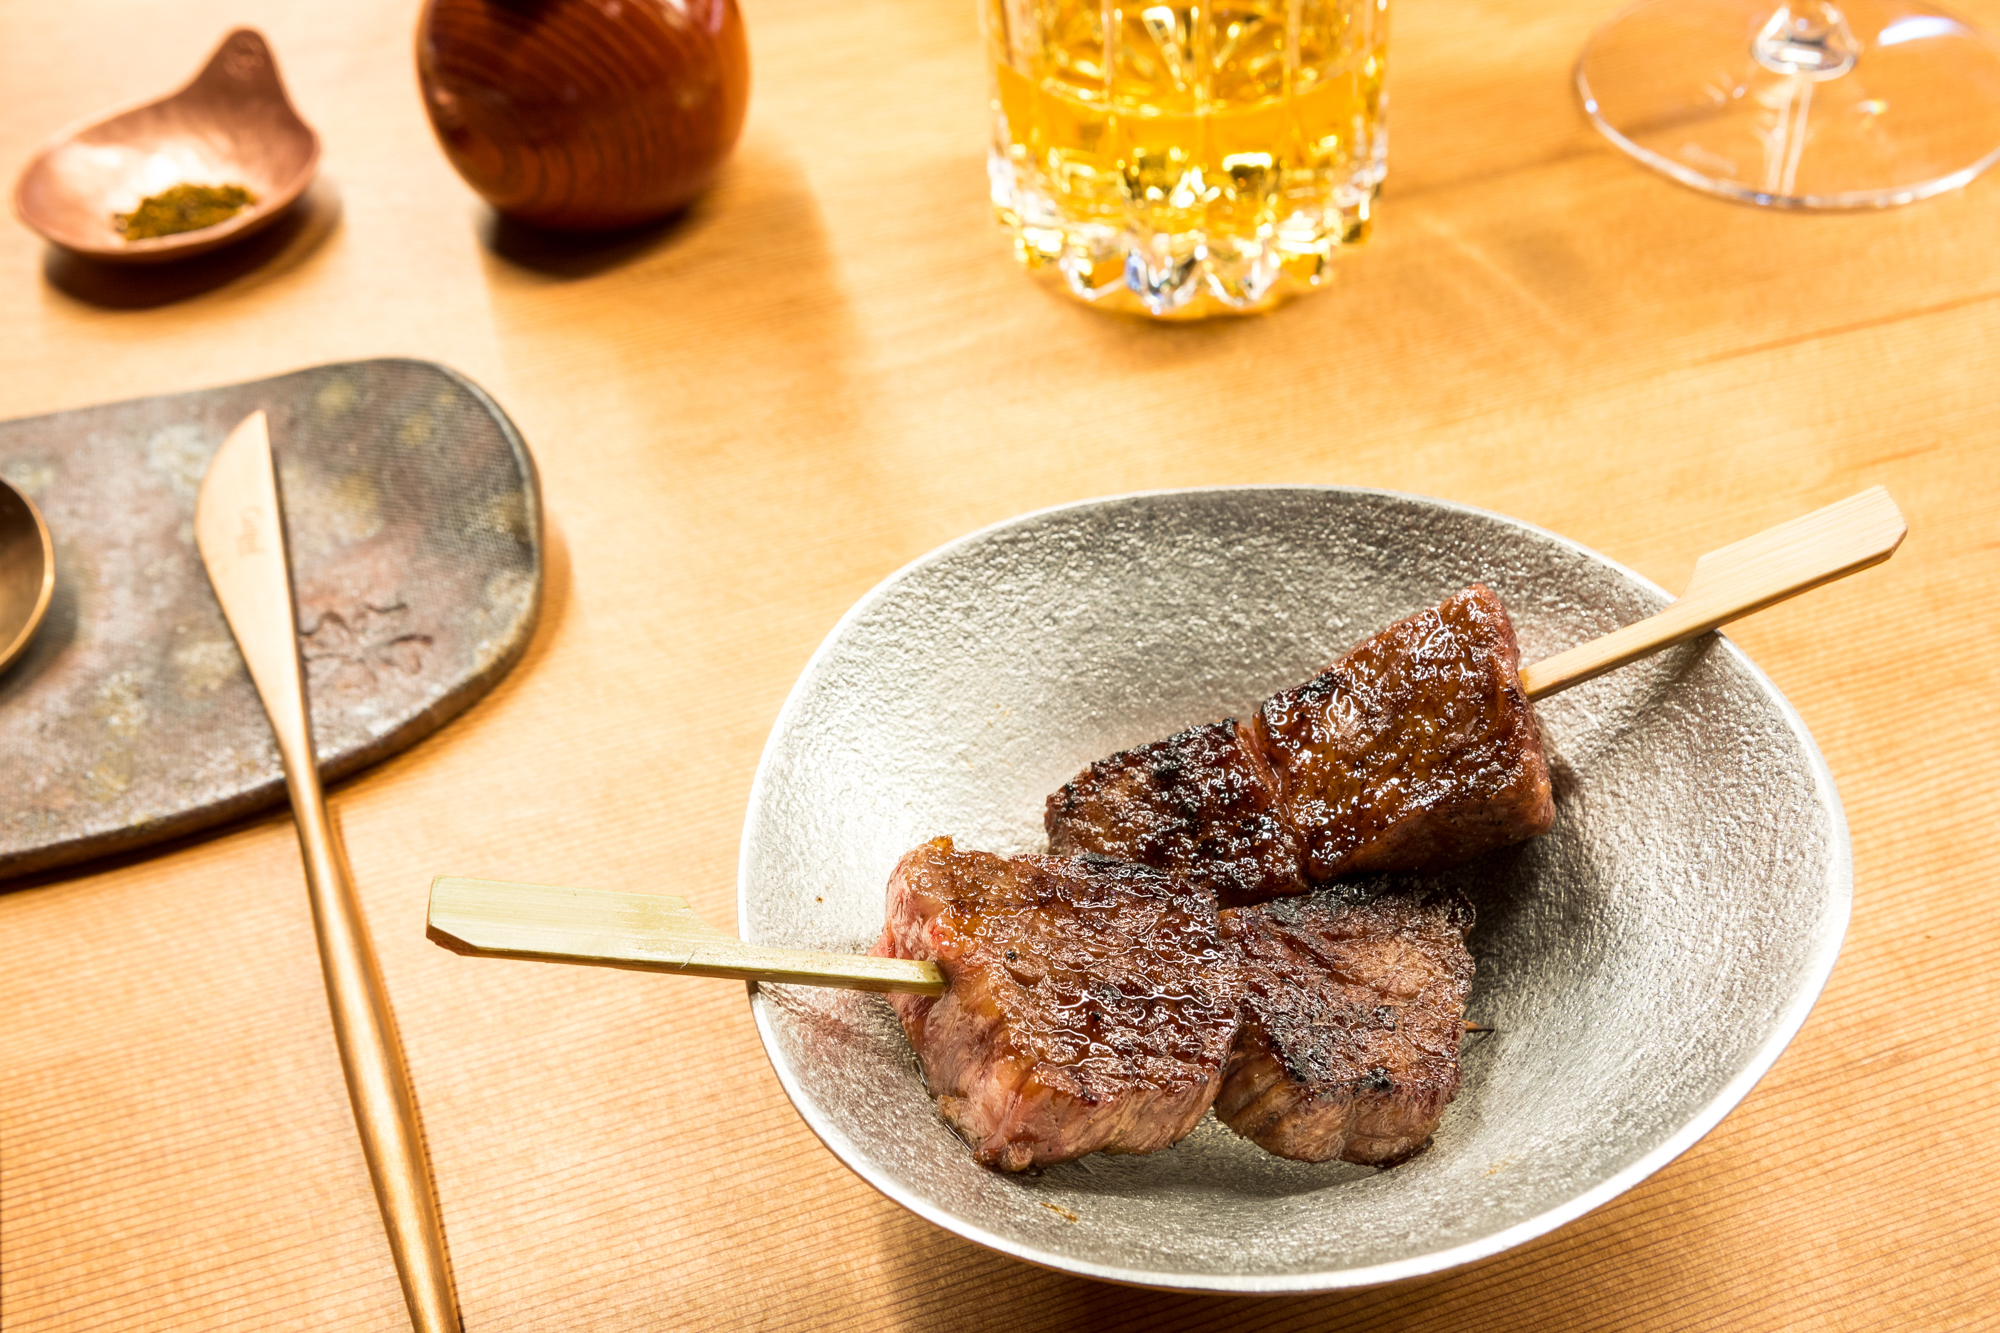 Yakitori-style skewers with cubes of wagyu steak in a shallow ceramic bowl.